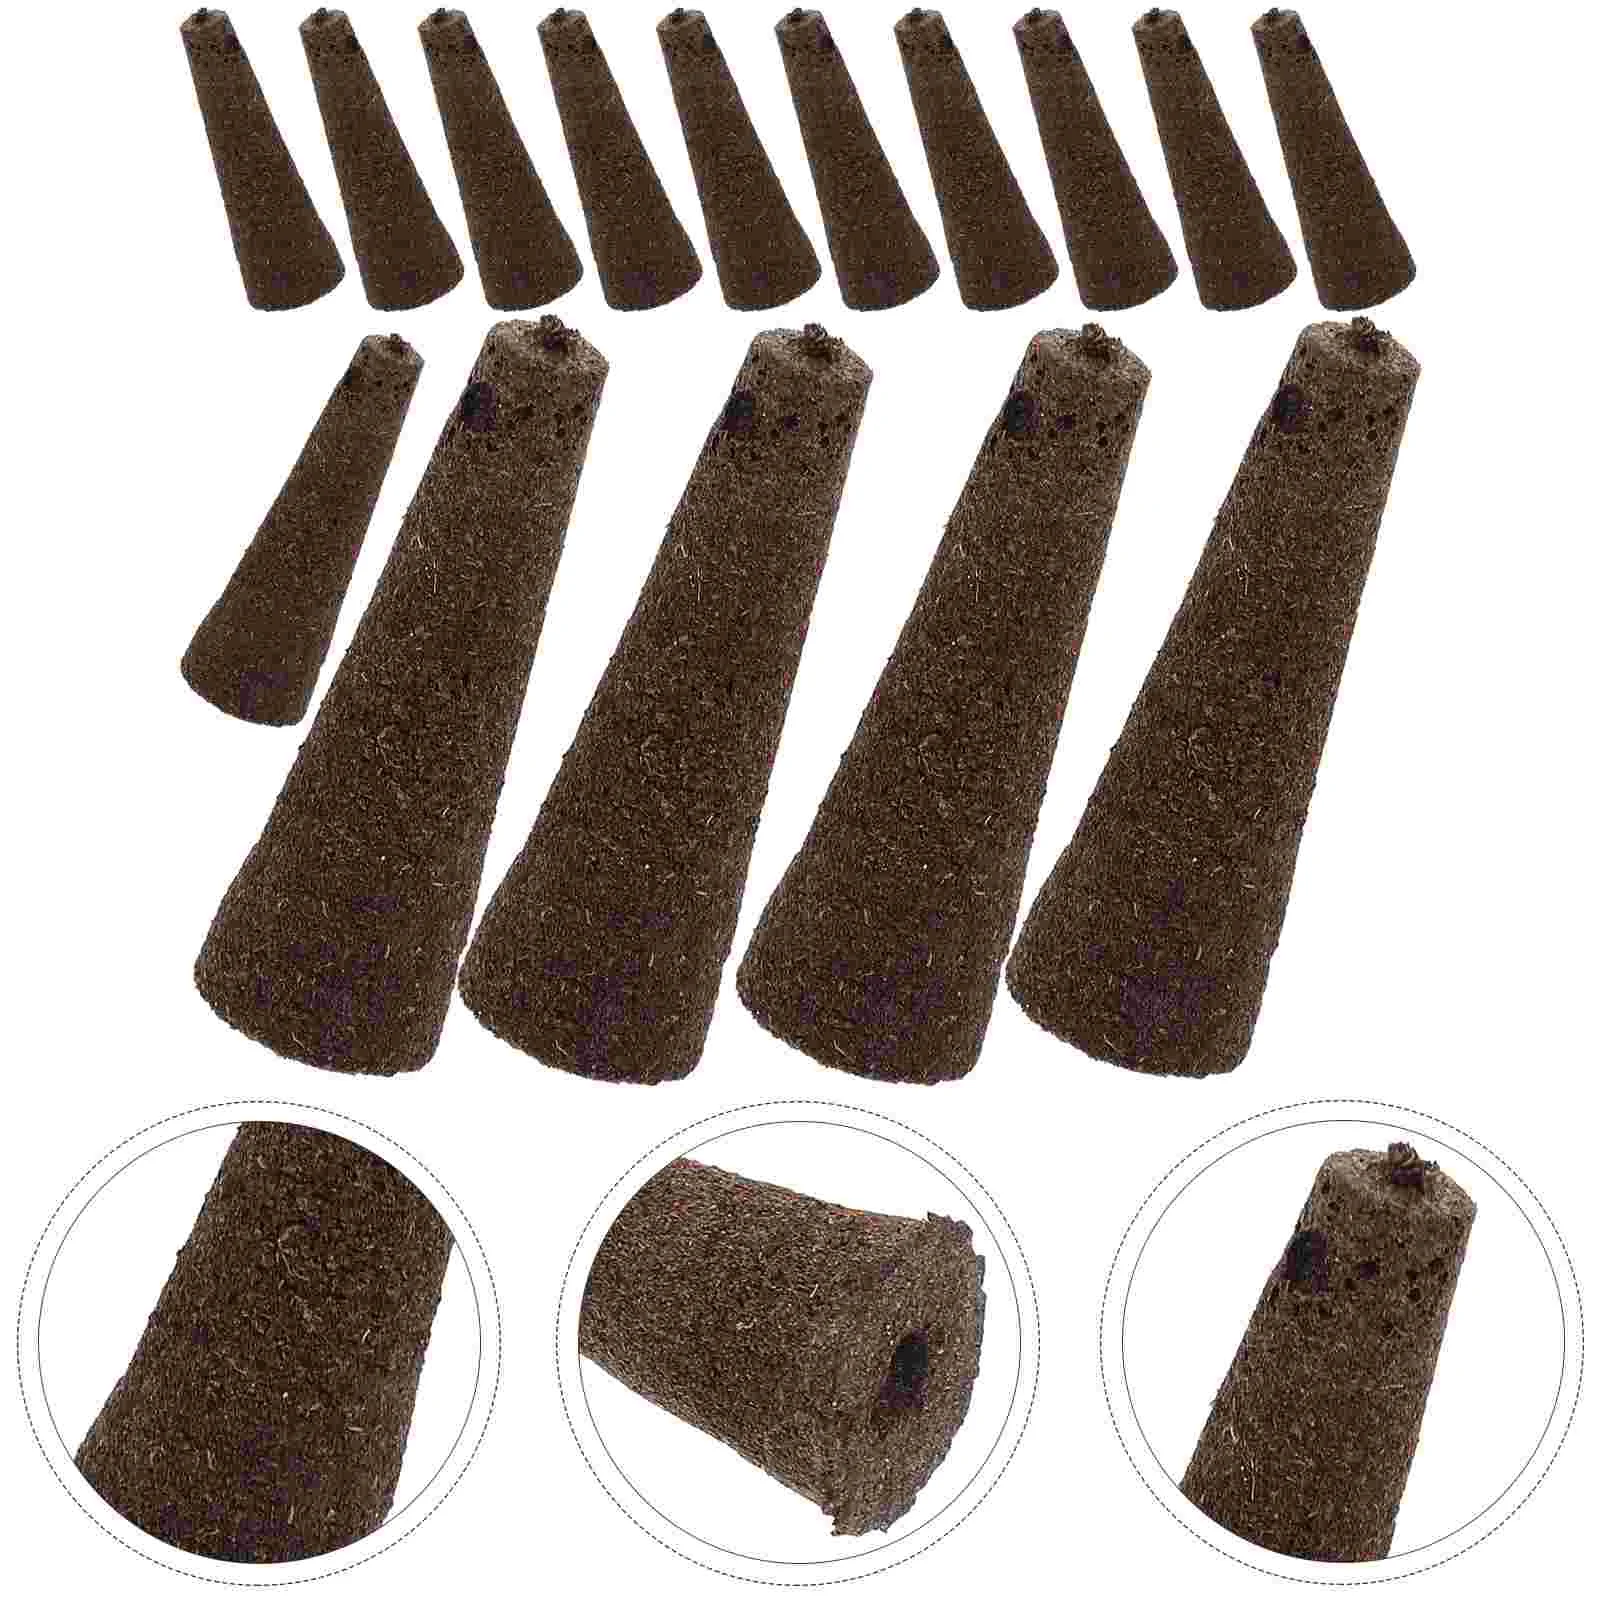 

50pcs Balanced Hydroponics Sponges Plant Starter Planter for Indoor Hydroponic Growing Systems